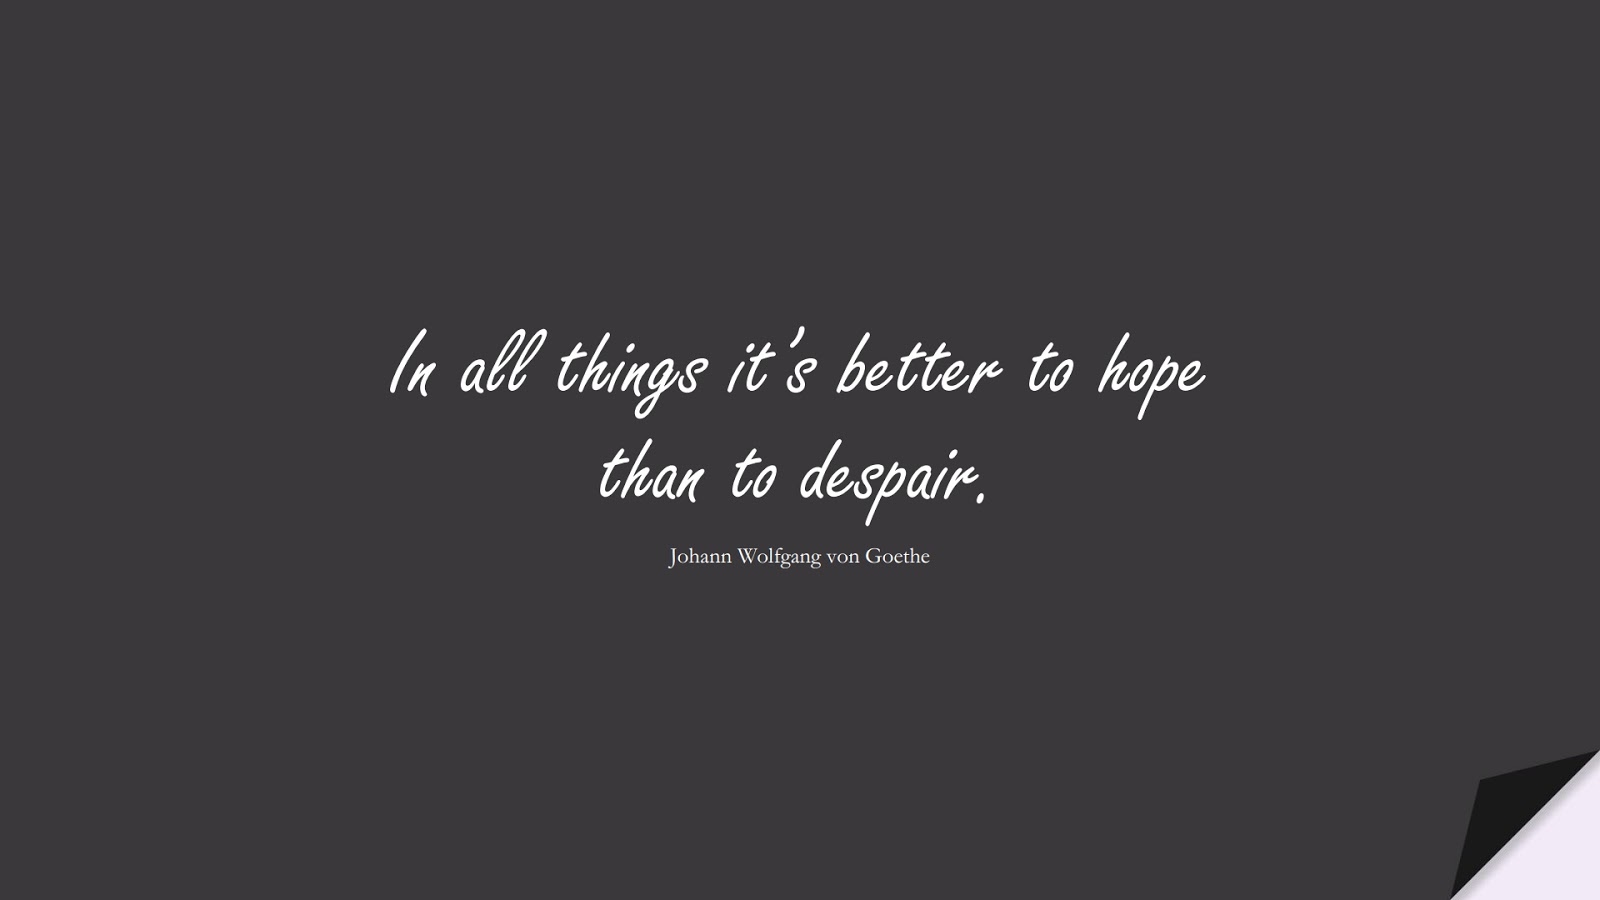 In all things it’s better to hope than to despair. (Johann Wolfgang von Goethe);  #FearQuotes